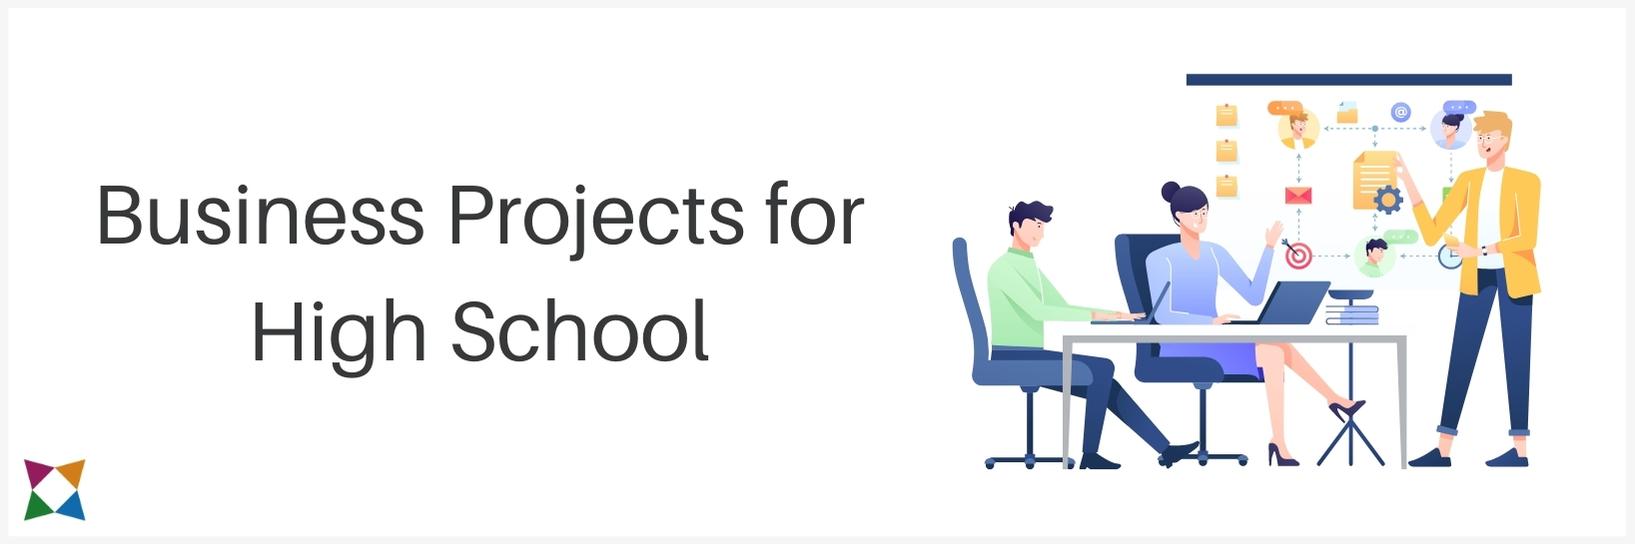 business project ideas for highschool students